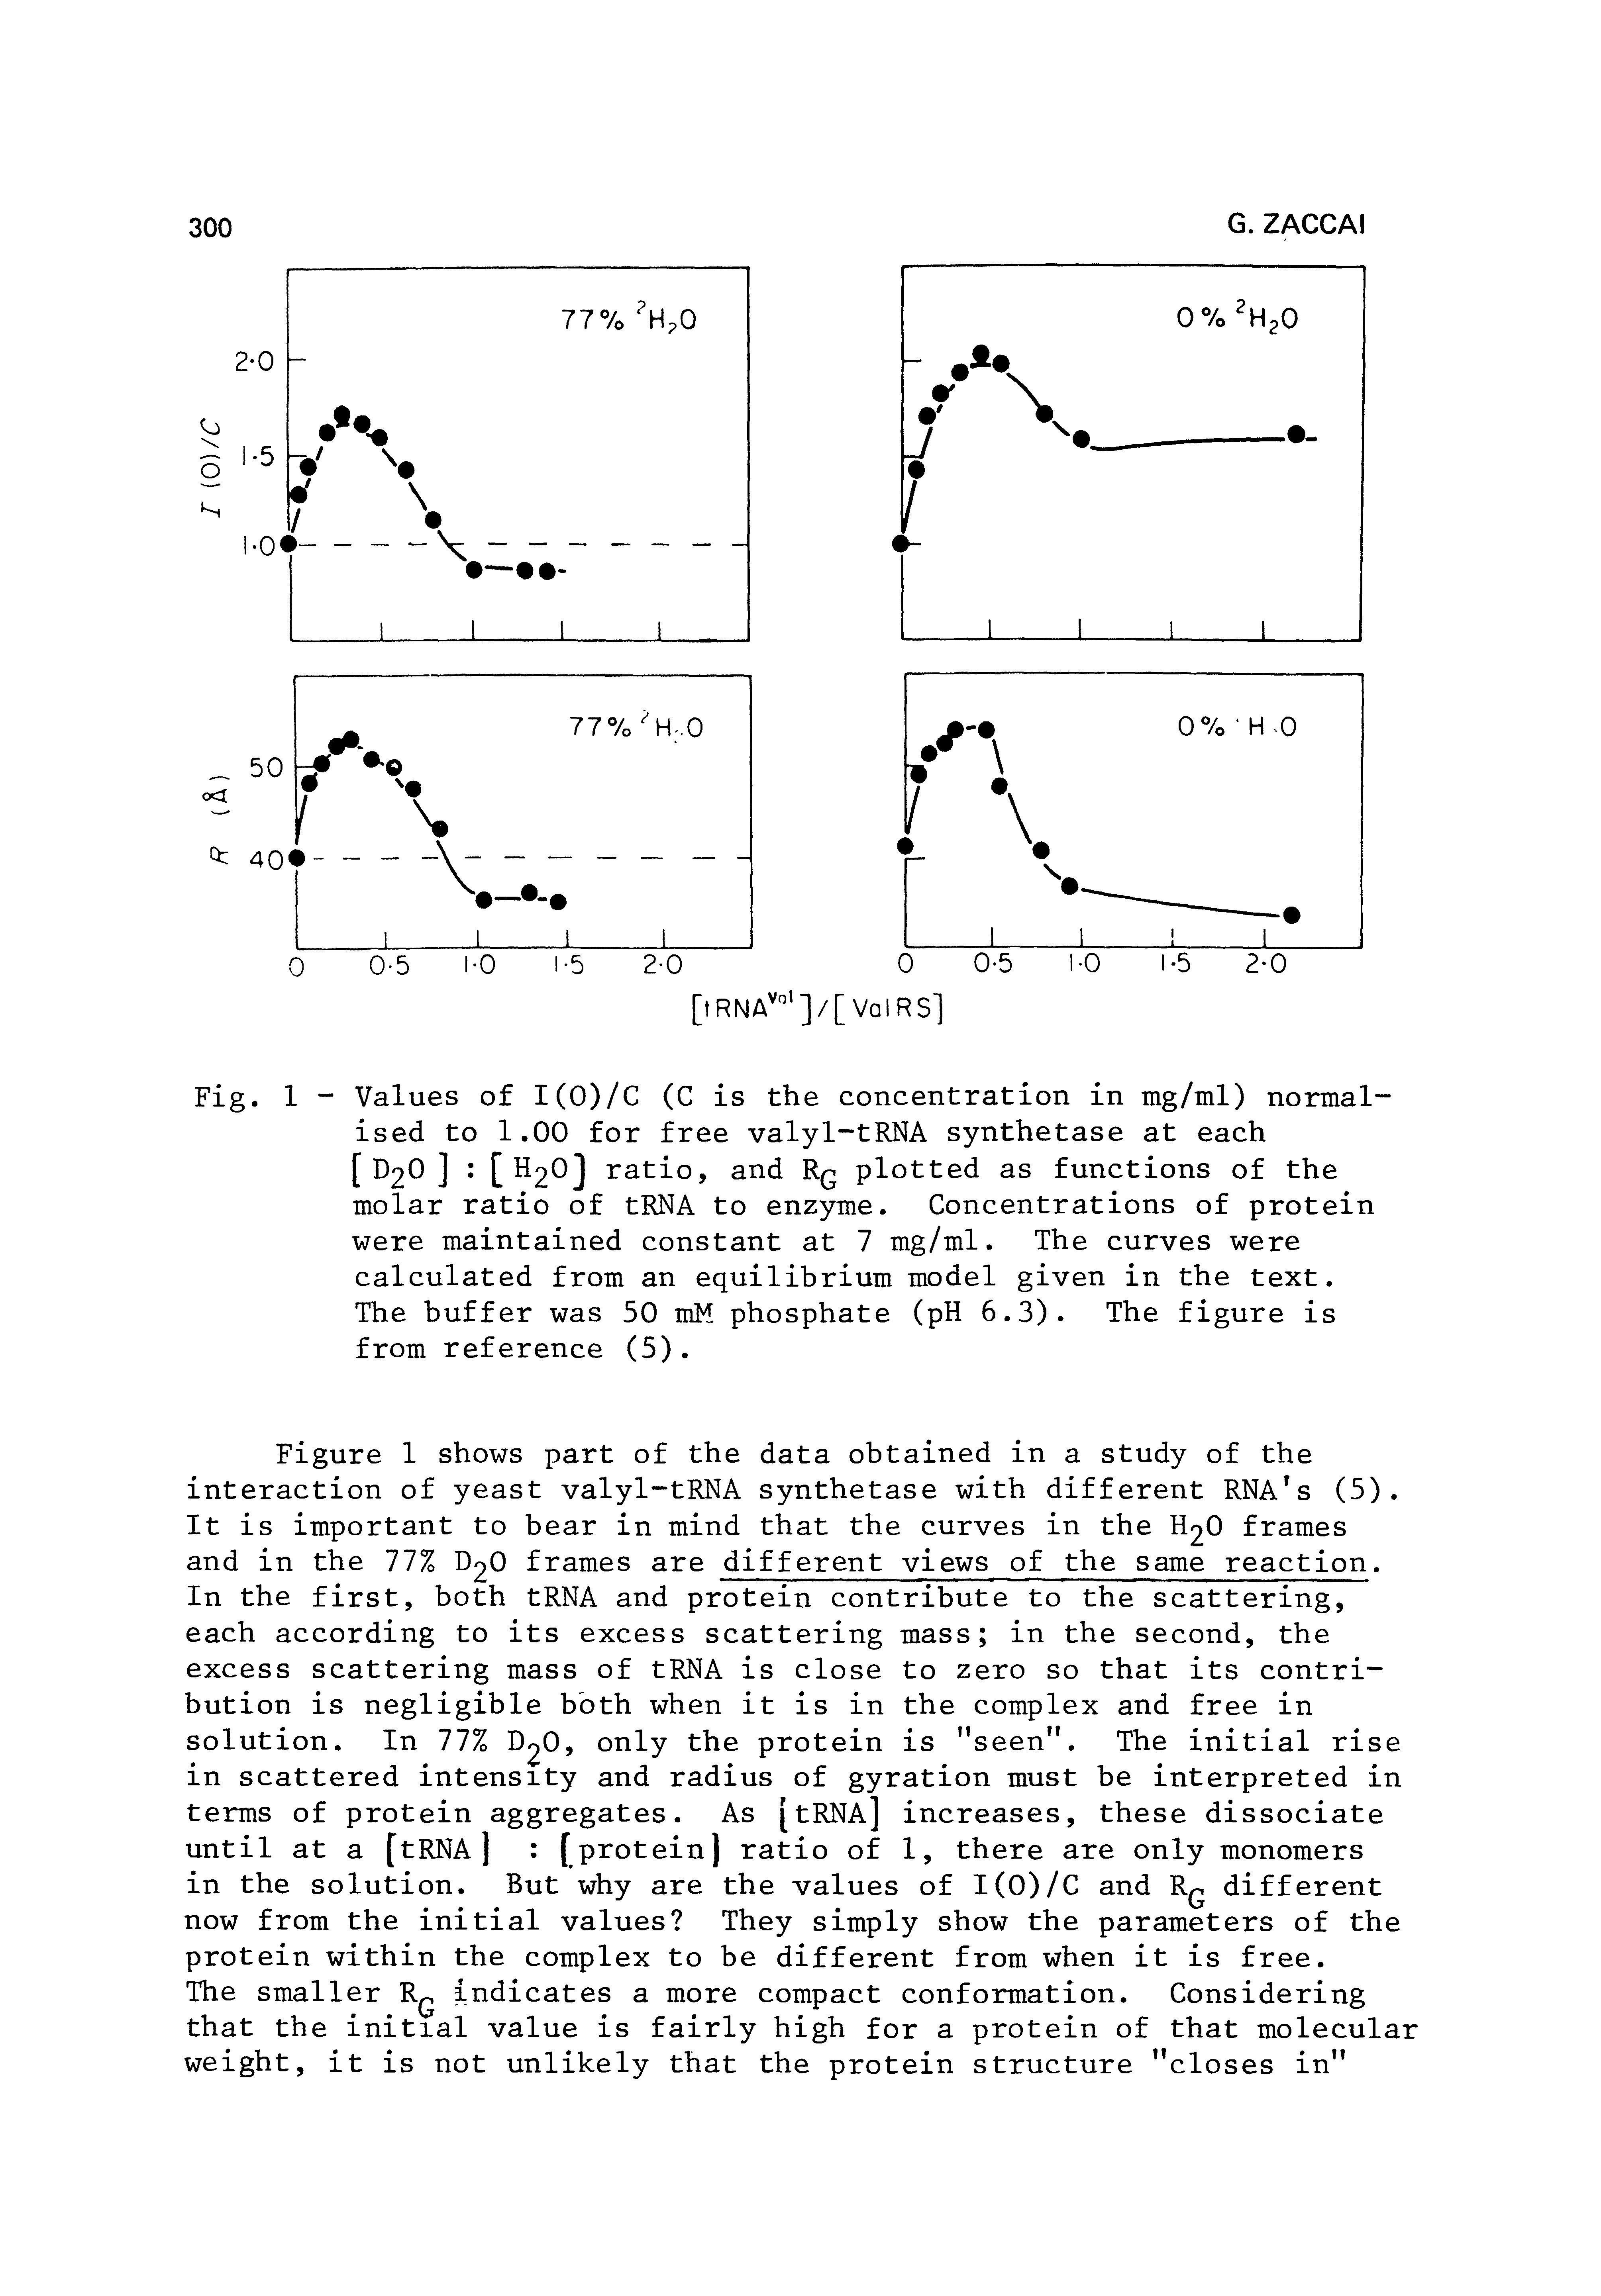 Fig. 1 - Values of I(0)/C (C is the concentration in mg/ml) normalised to 1.00 for free valyl-tRNA synthetase at each [ D2O ] [ H2Oj ratio, and Rq plotted as functions of the molar ratio of tRNA to enzyme. Concentrations of protein were maintained constant at 7 mg/ml. The curves were calculated from an equilibrium model given in the text.